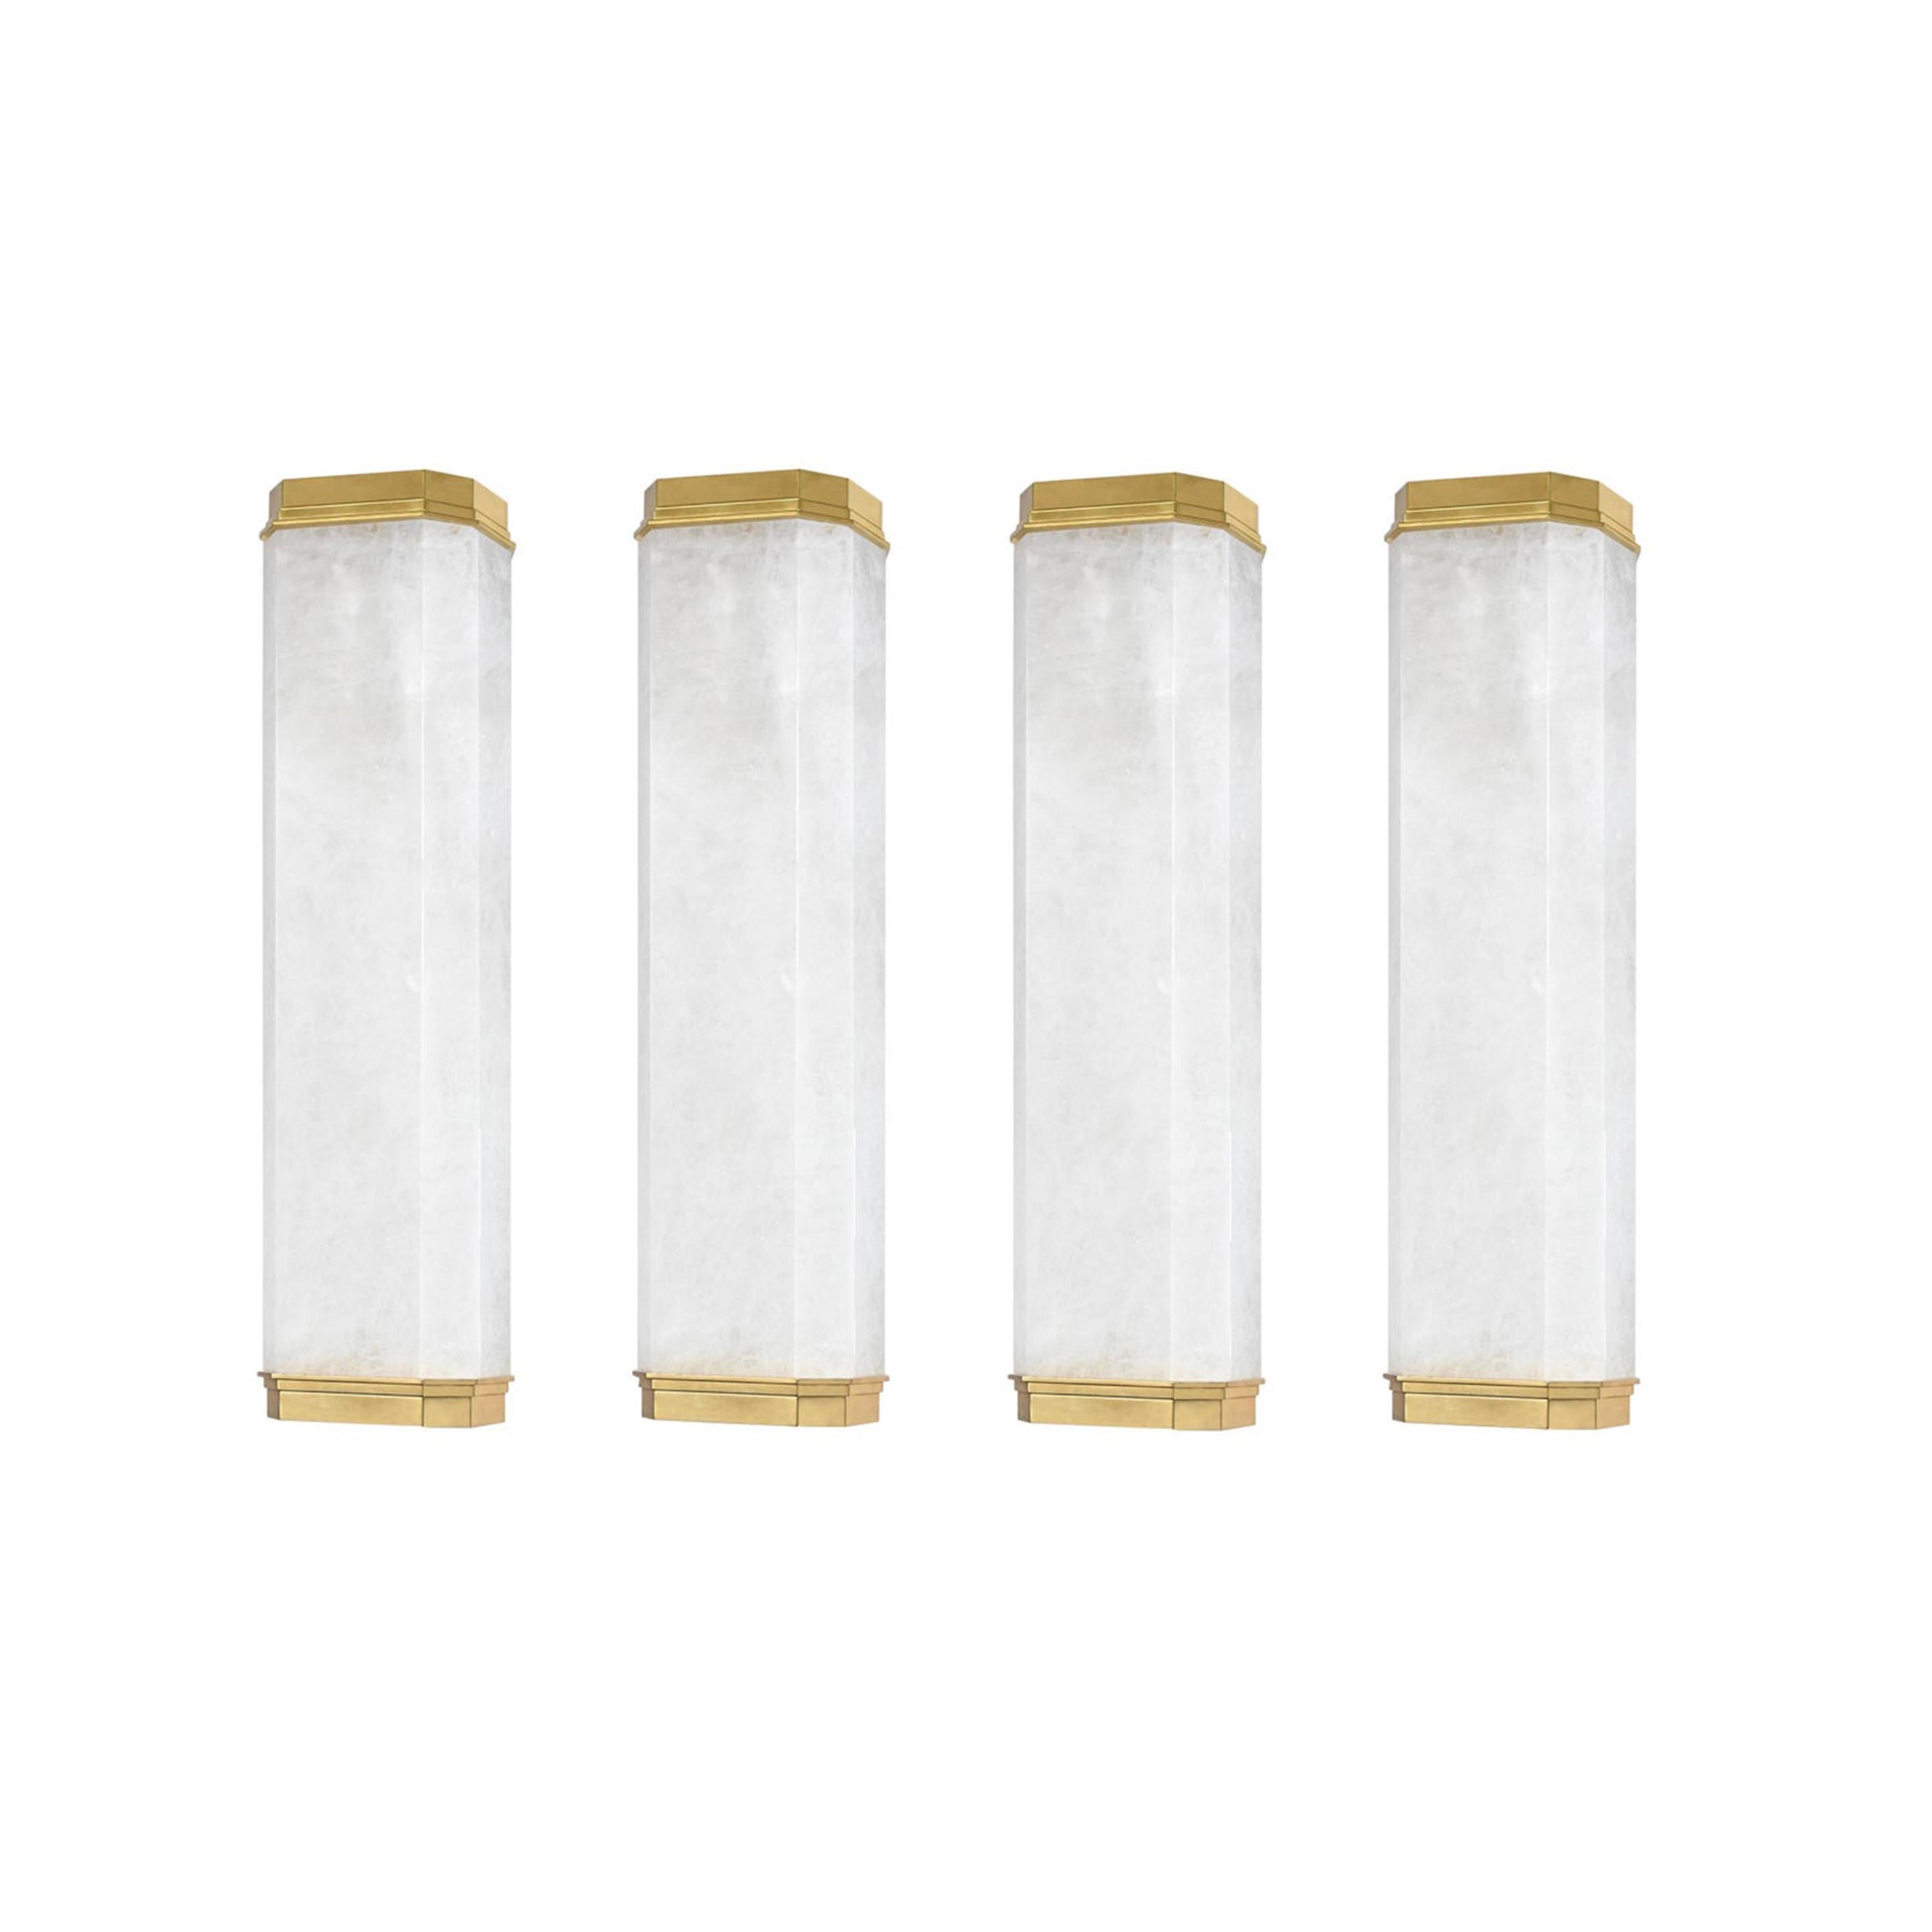 Group of Four HNP Rock Crystal Sconces by Phoenix For Sale